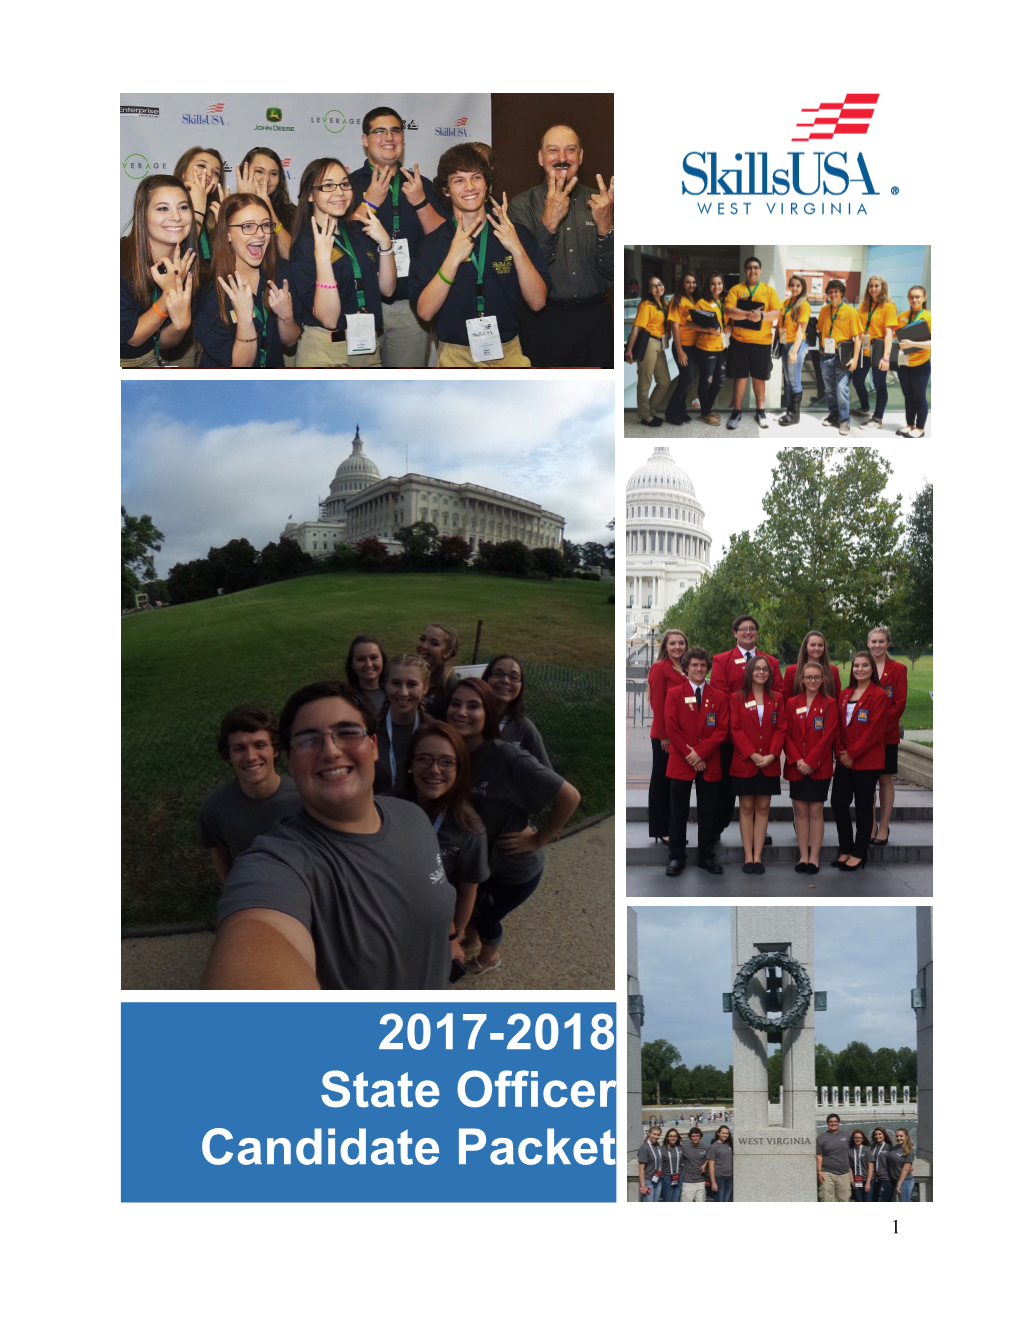 Are You Thinking of Becoming a State Officer?